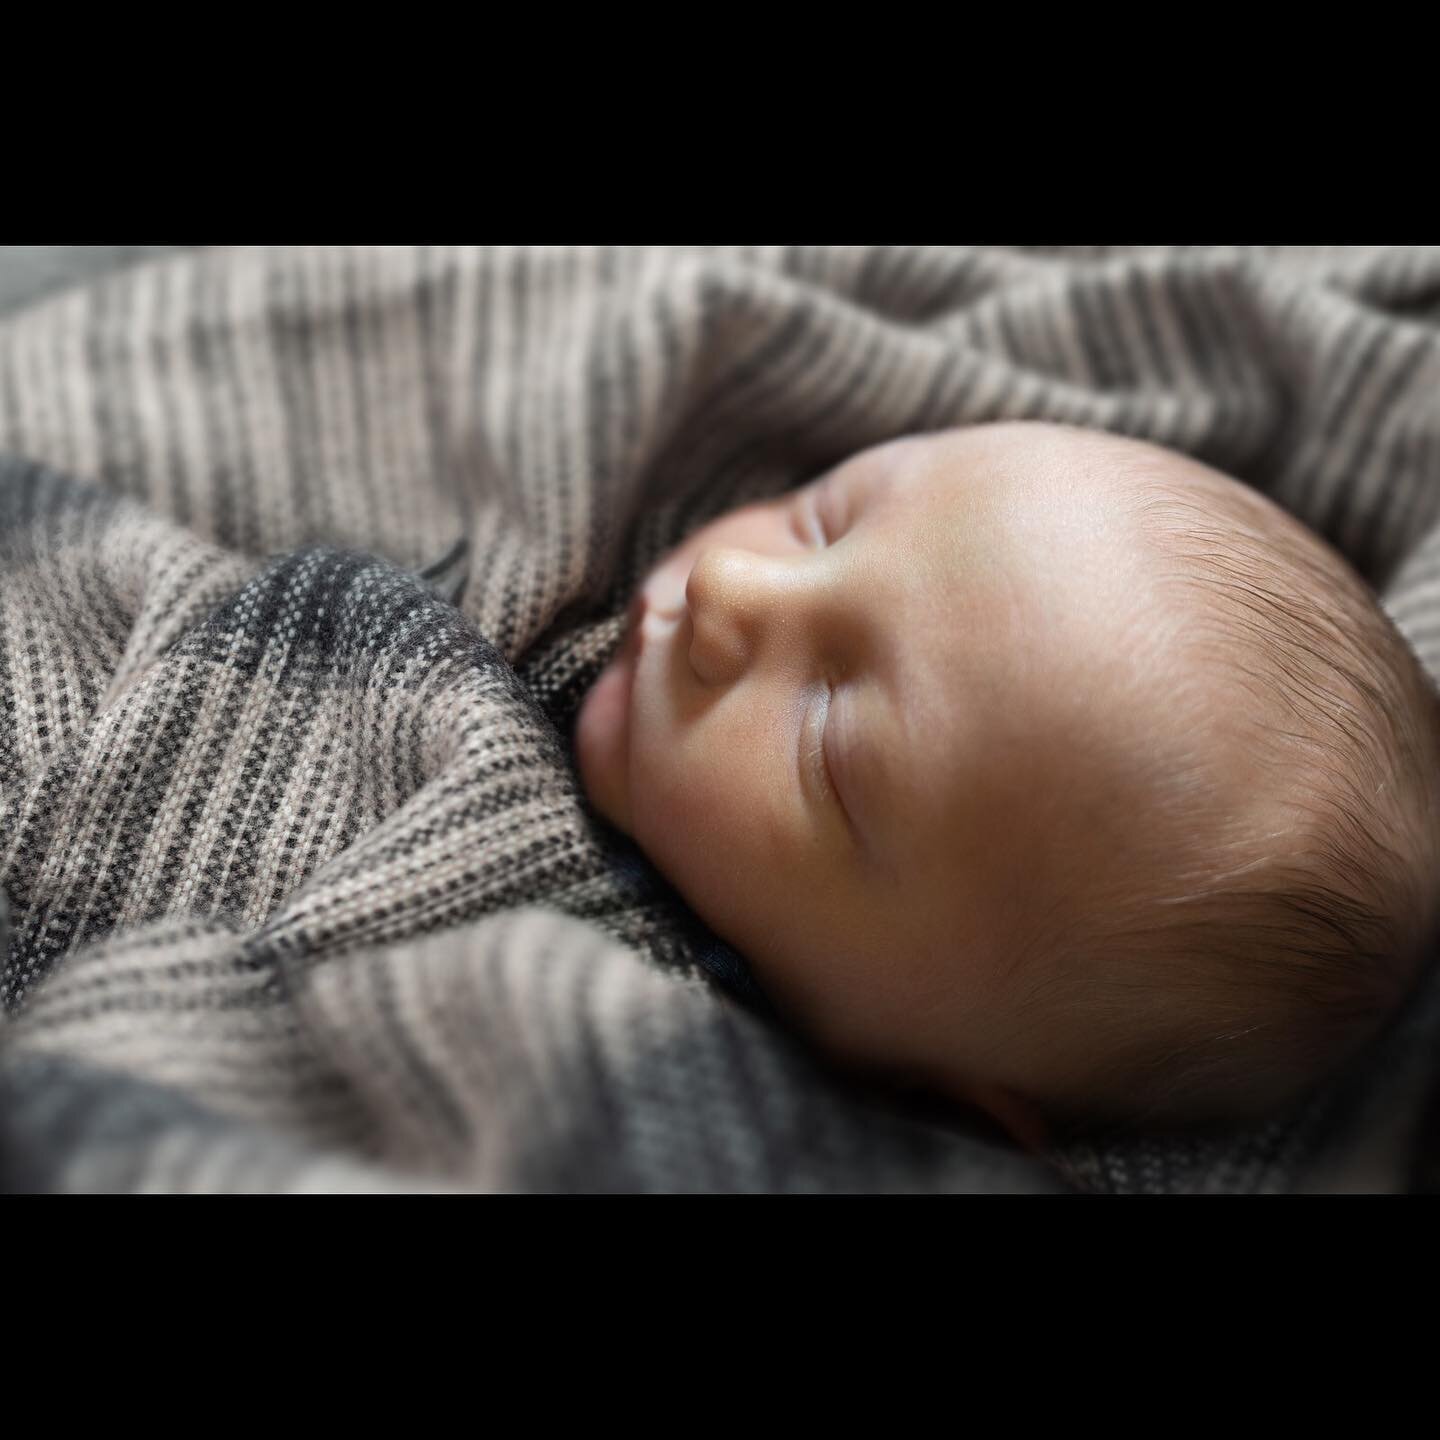 Things have been a bit busy. Shooting, refurbishing my Japanese Tea house and oh yea I&rsquo;m a GRANDFATHER!! He&rsquo;s gorgeous and knows how to get gramps around his little finger. .
.
.
#scottharbenphotography #advertisingphotography #kyraharben